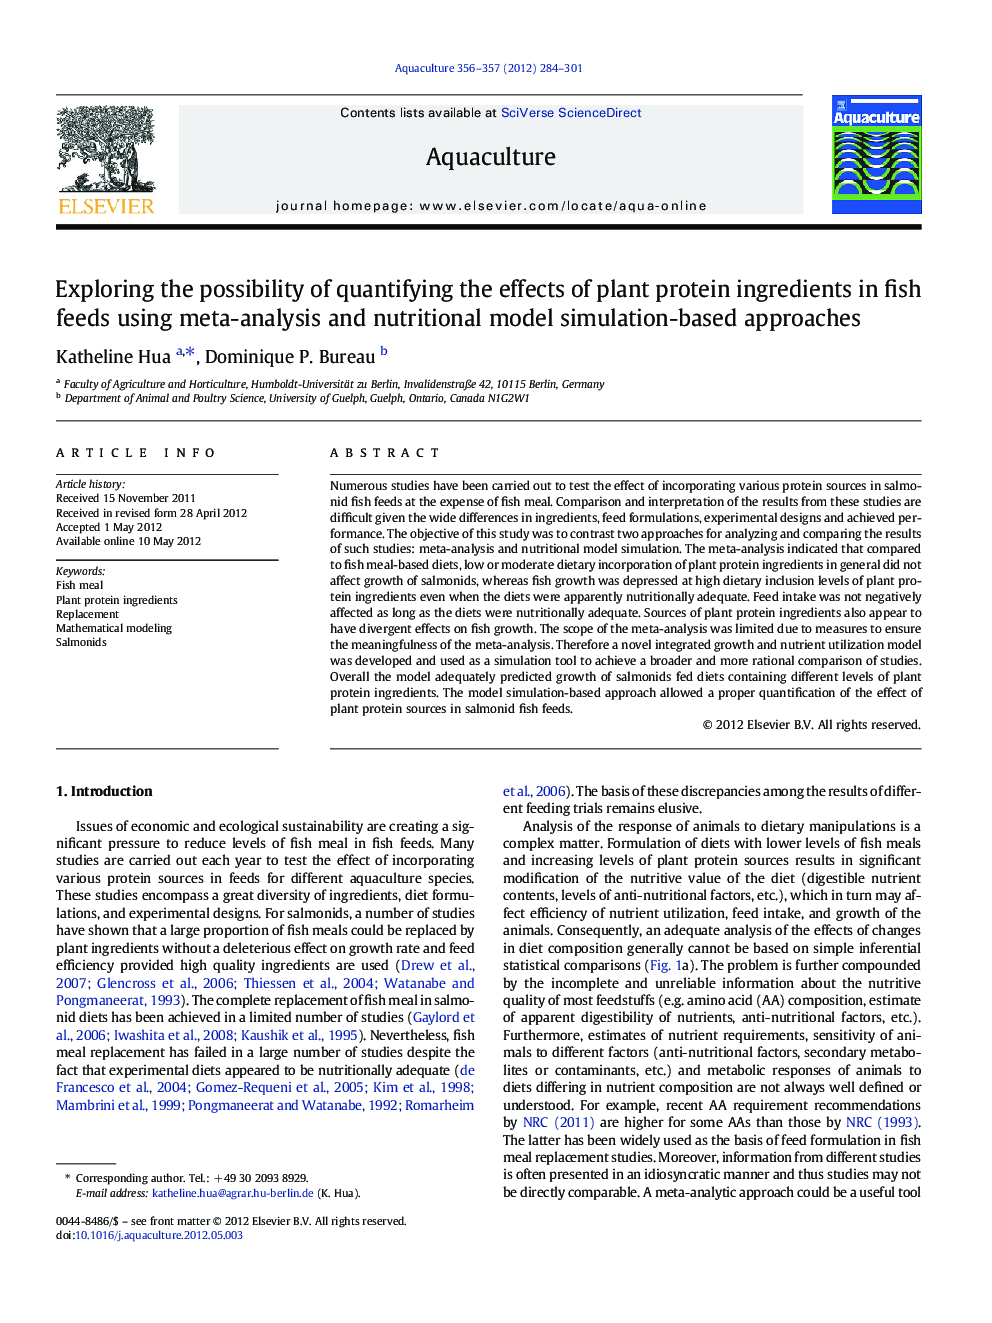 Exploring the possibility of quantifying the effects of plant protein ingredients in fish feeds using meta-analysis and nutritional model simulation-based approaches